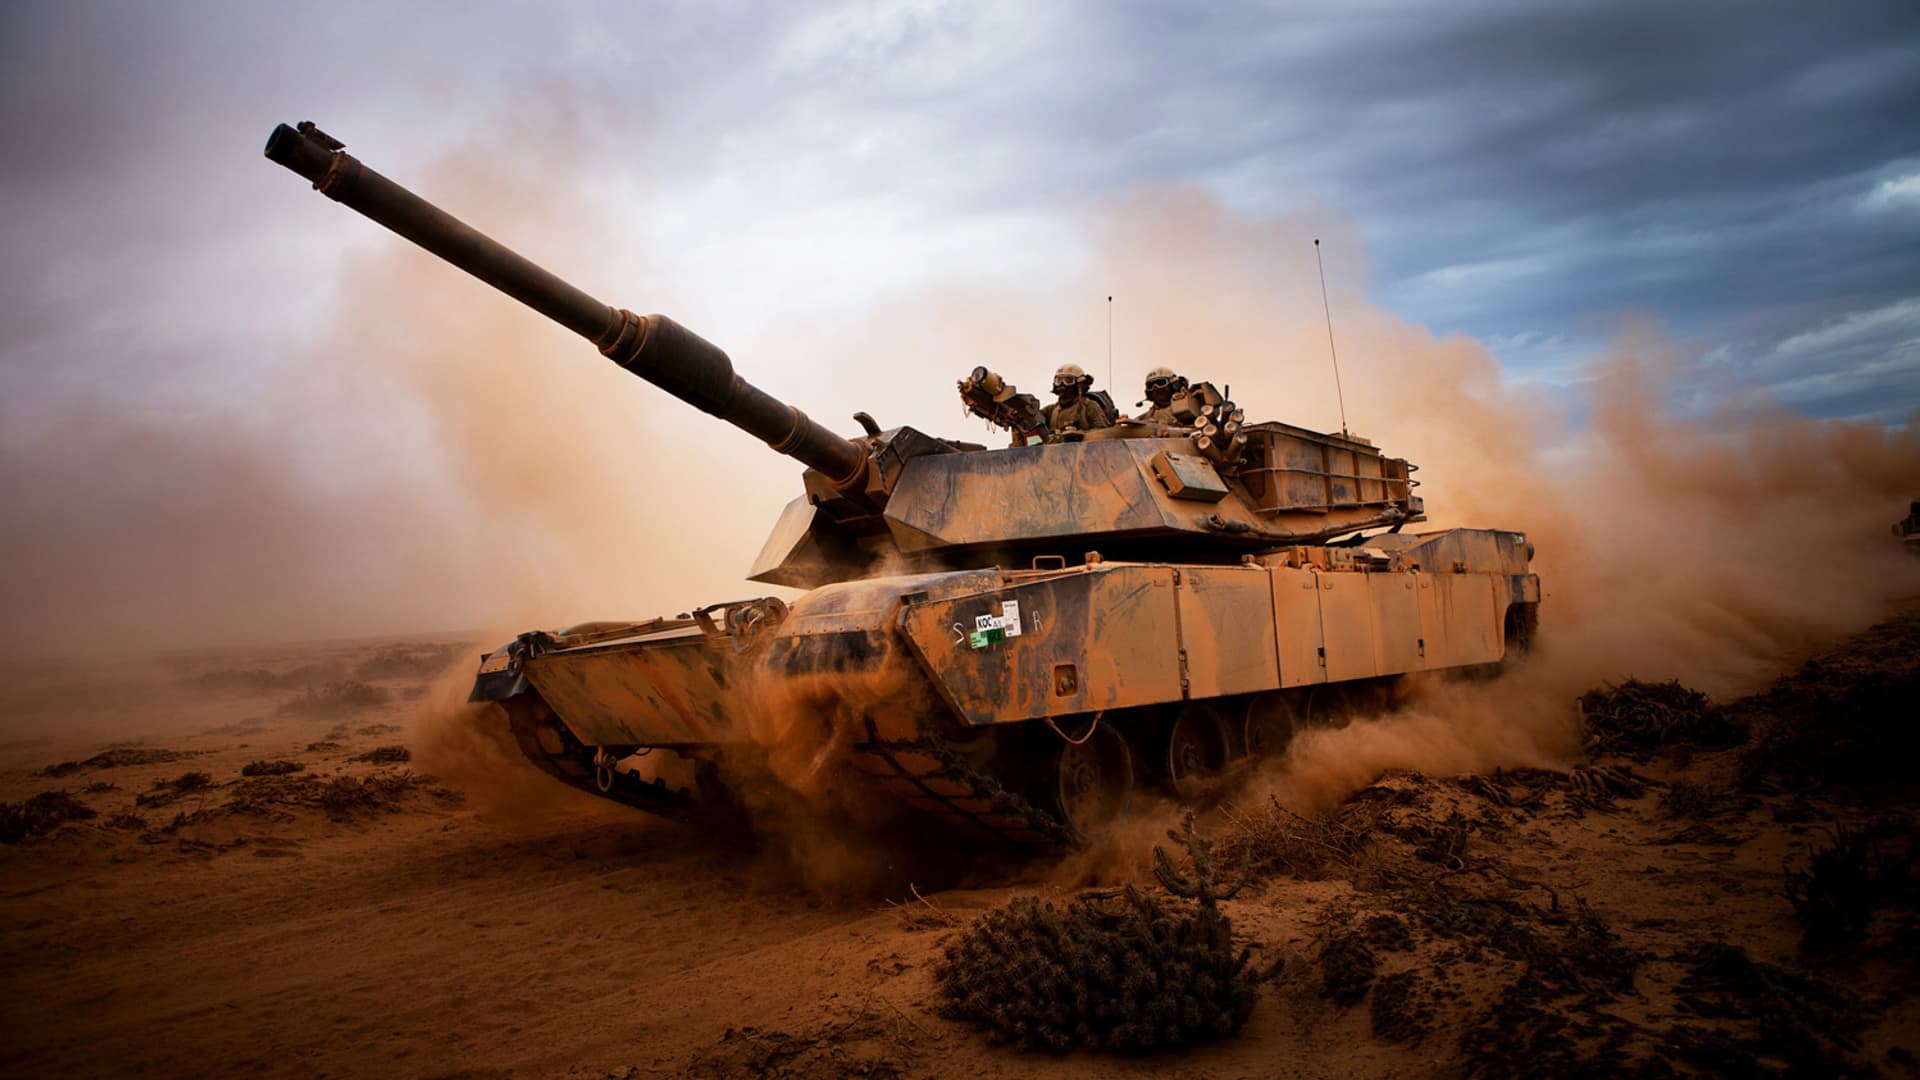 A U.S. M1A1 Abrams Main Battle Tank during a day of training at Exercise.